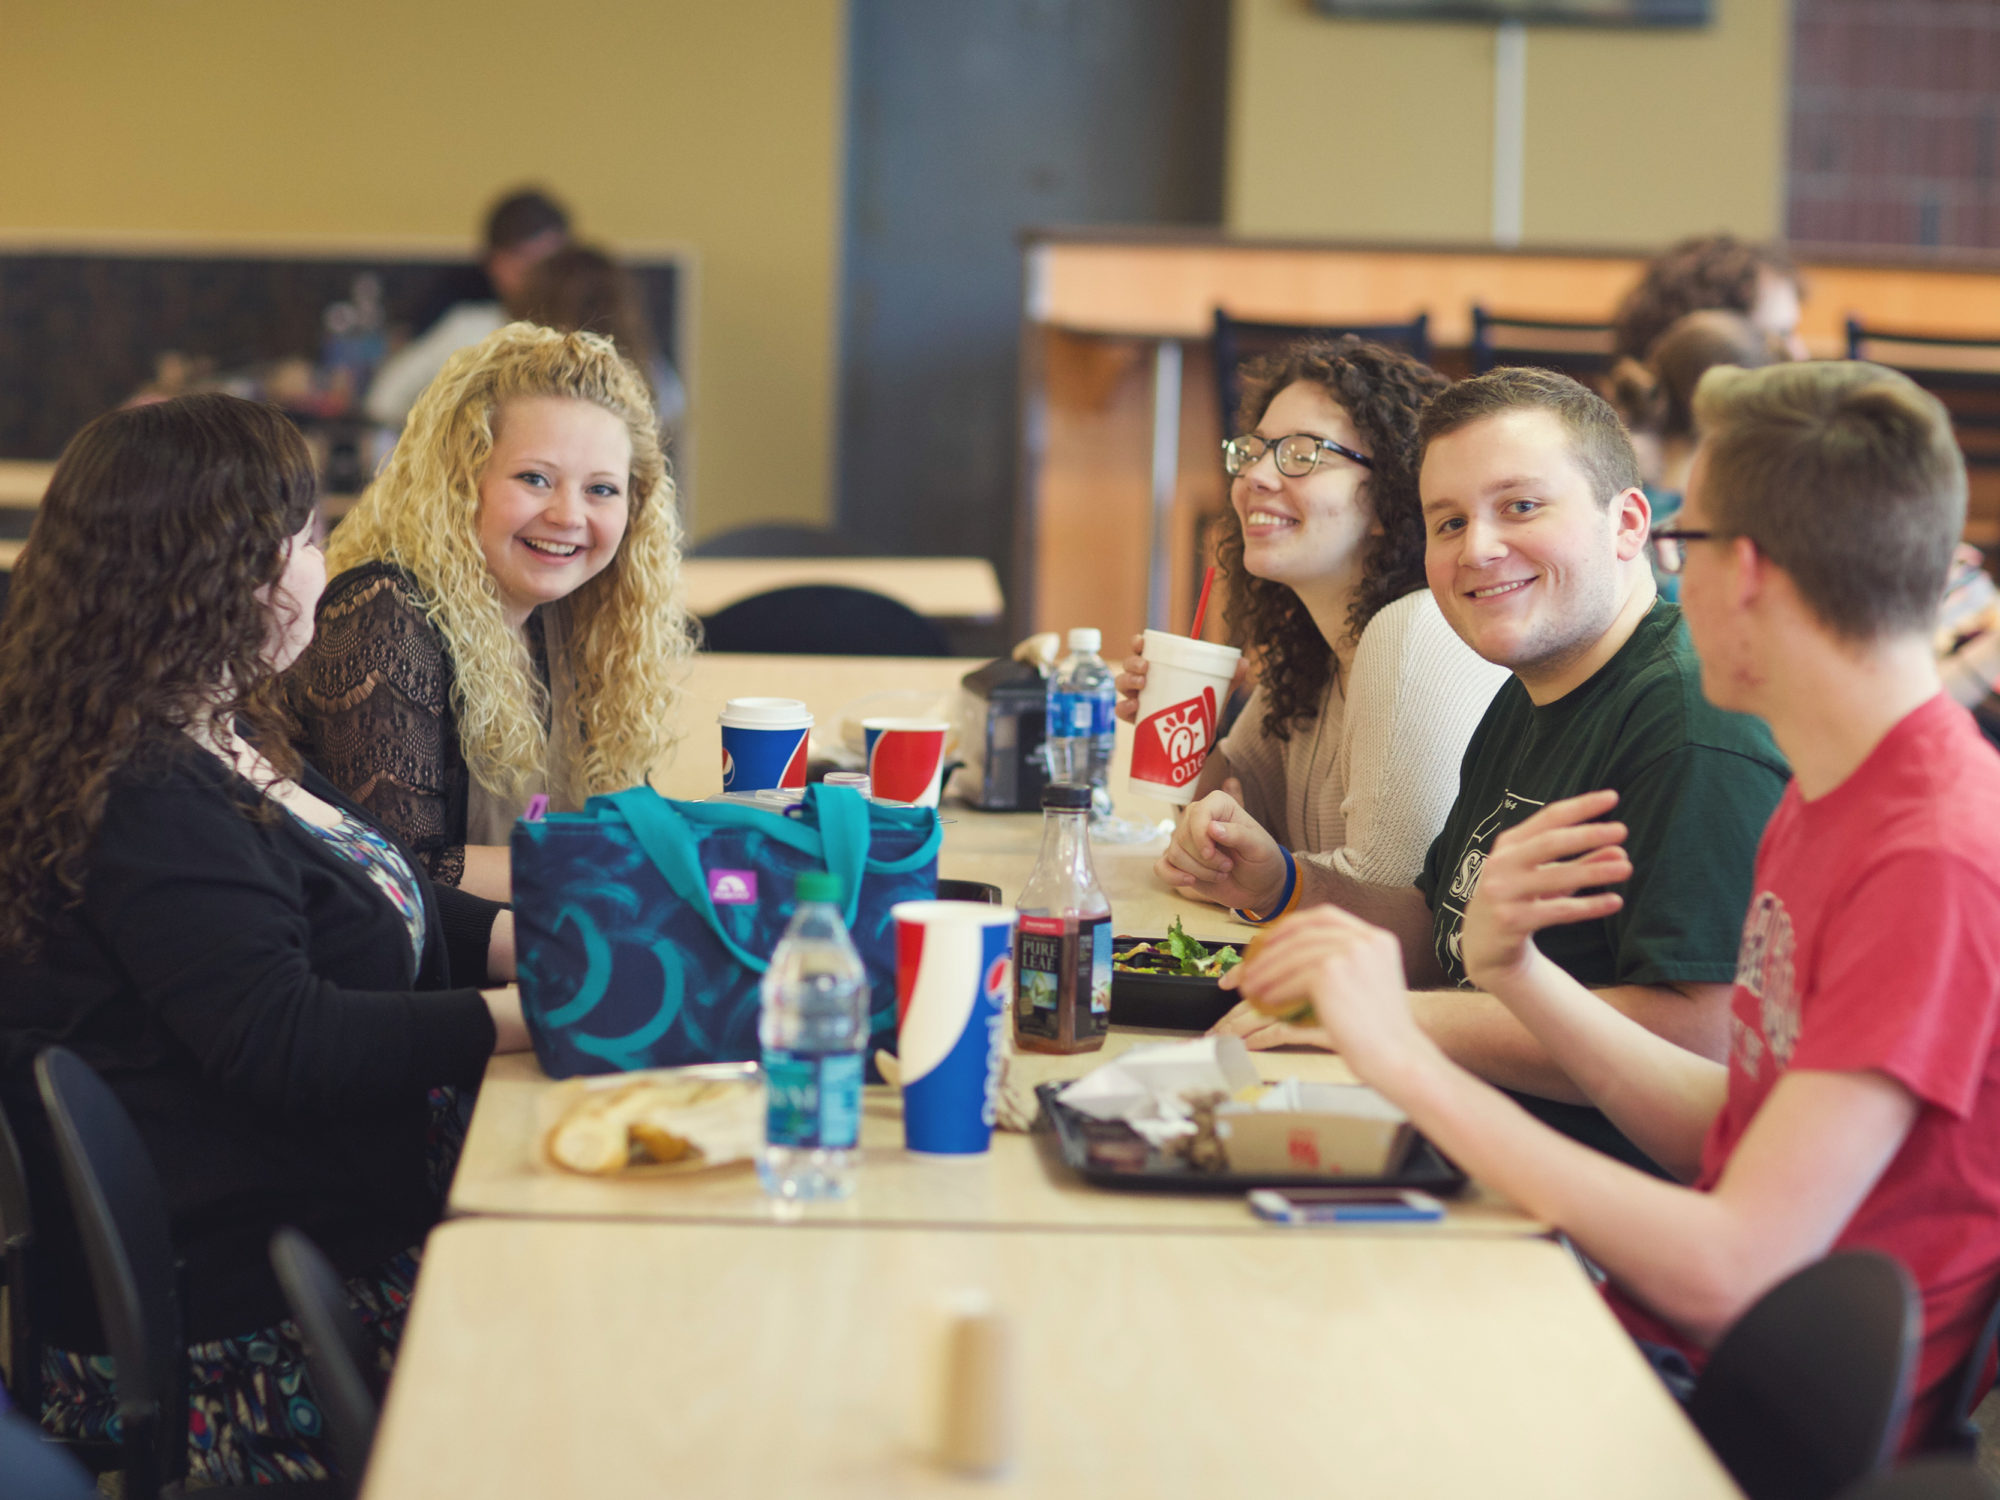 Five students gathered together at a long table eating lunch.